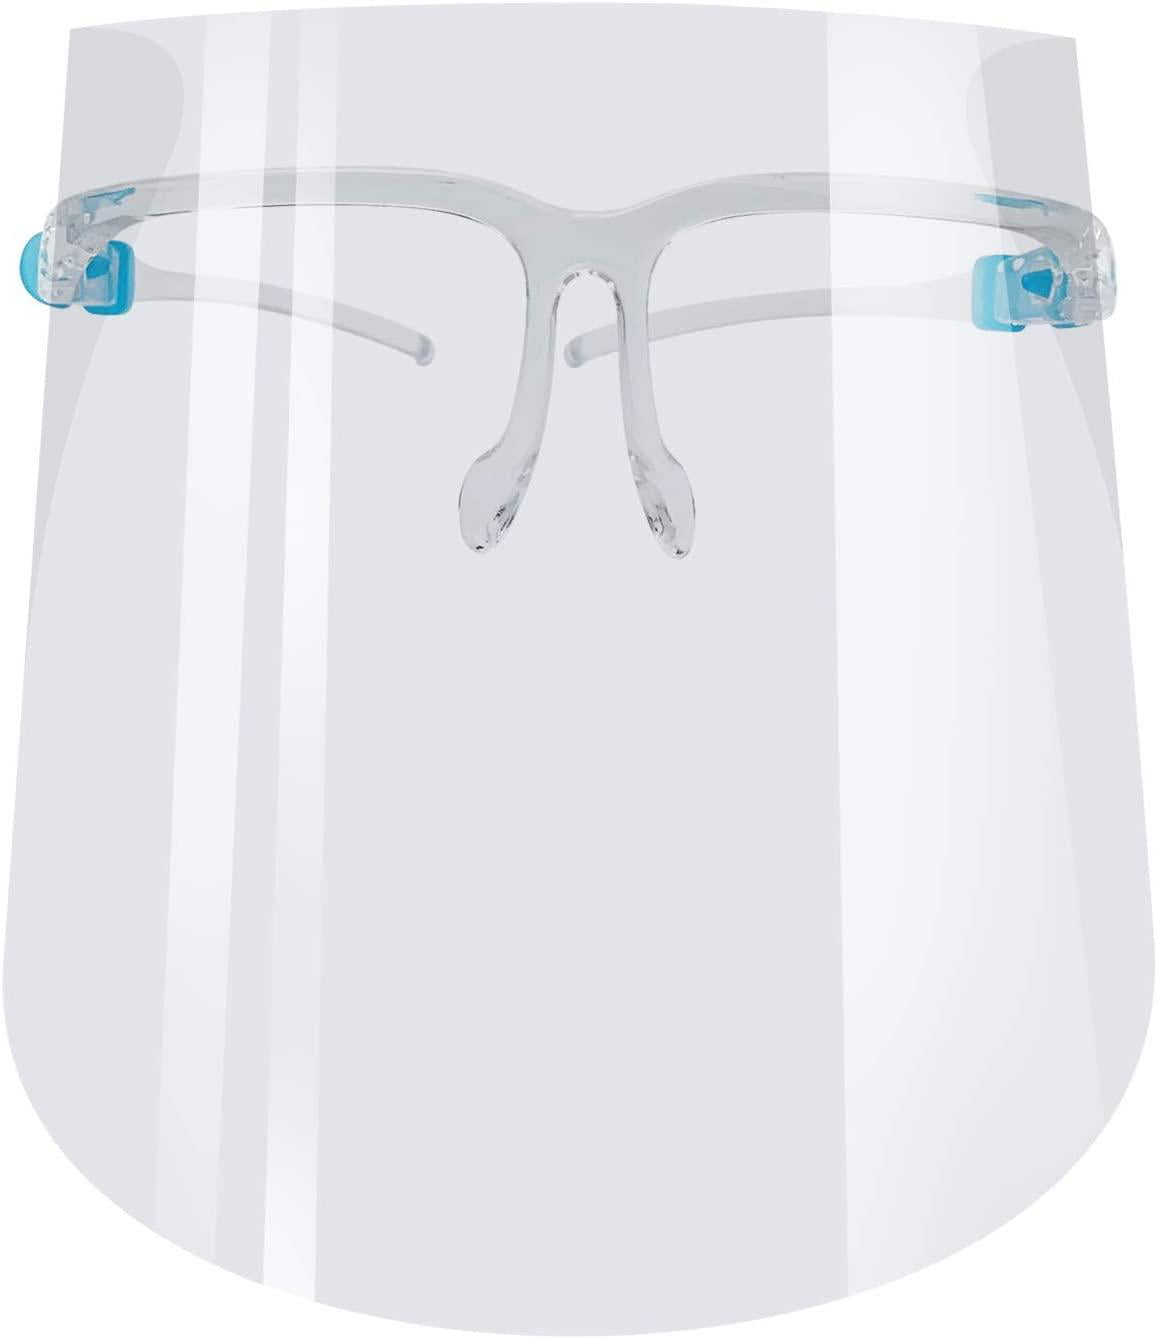 1/2Pack Safety Face Full Shield With Glasses Clear Reusable Protection Cover US 